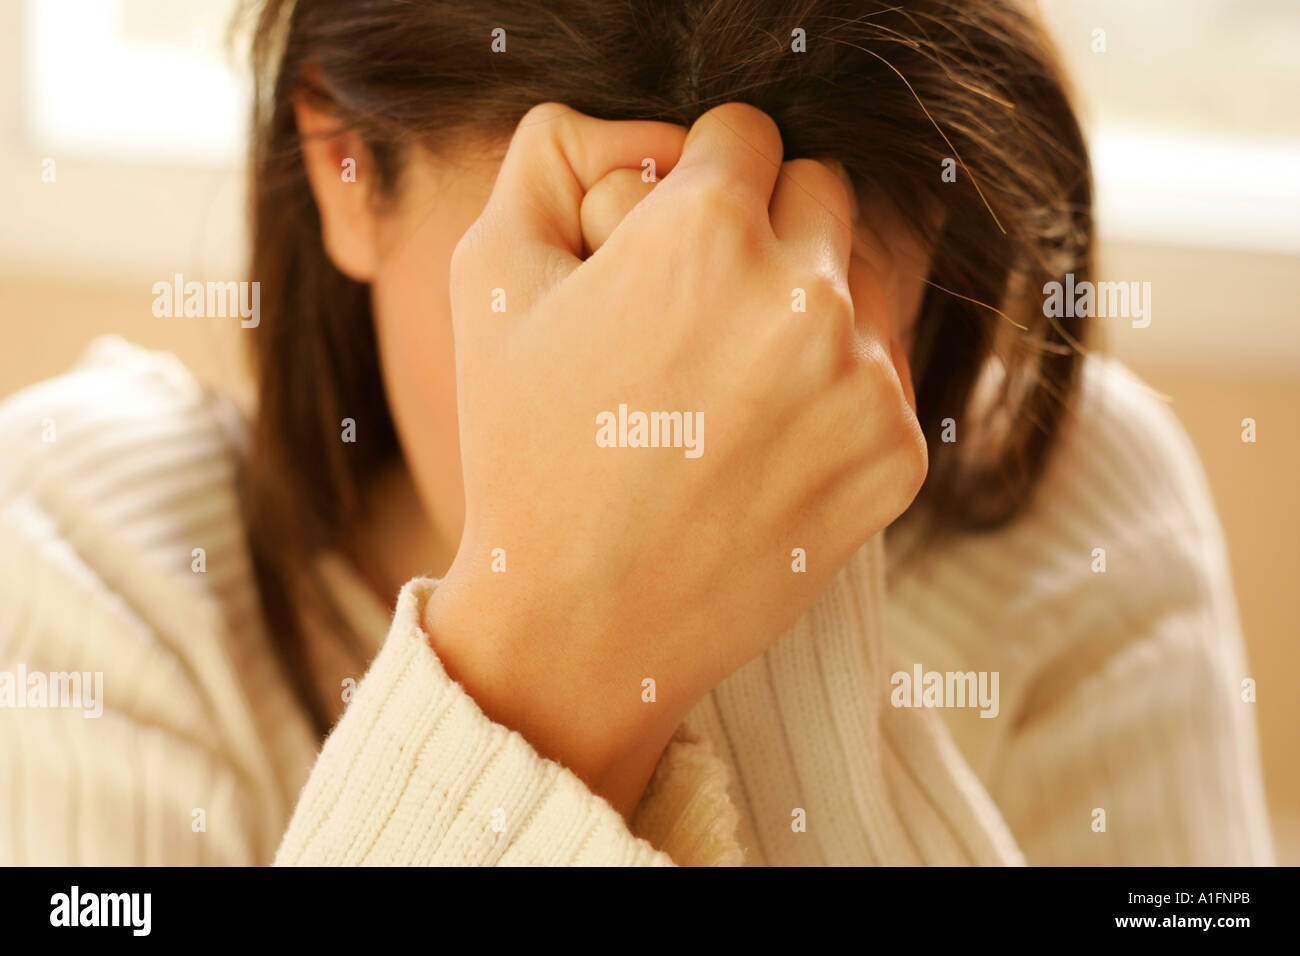 Woman clasping hands Stock Photo